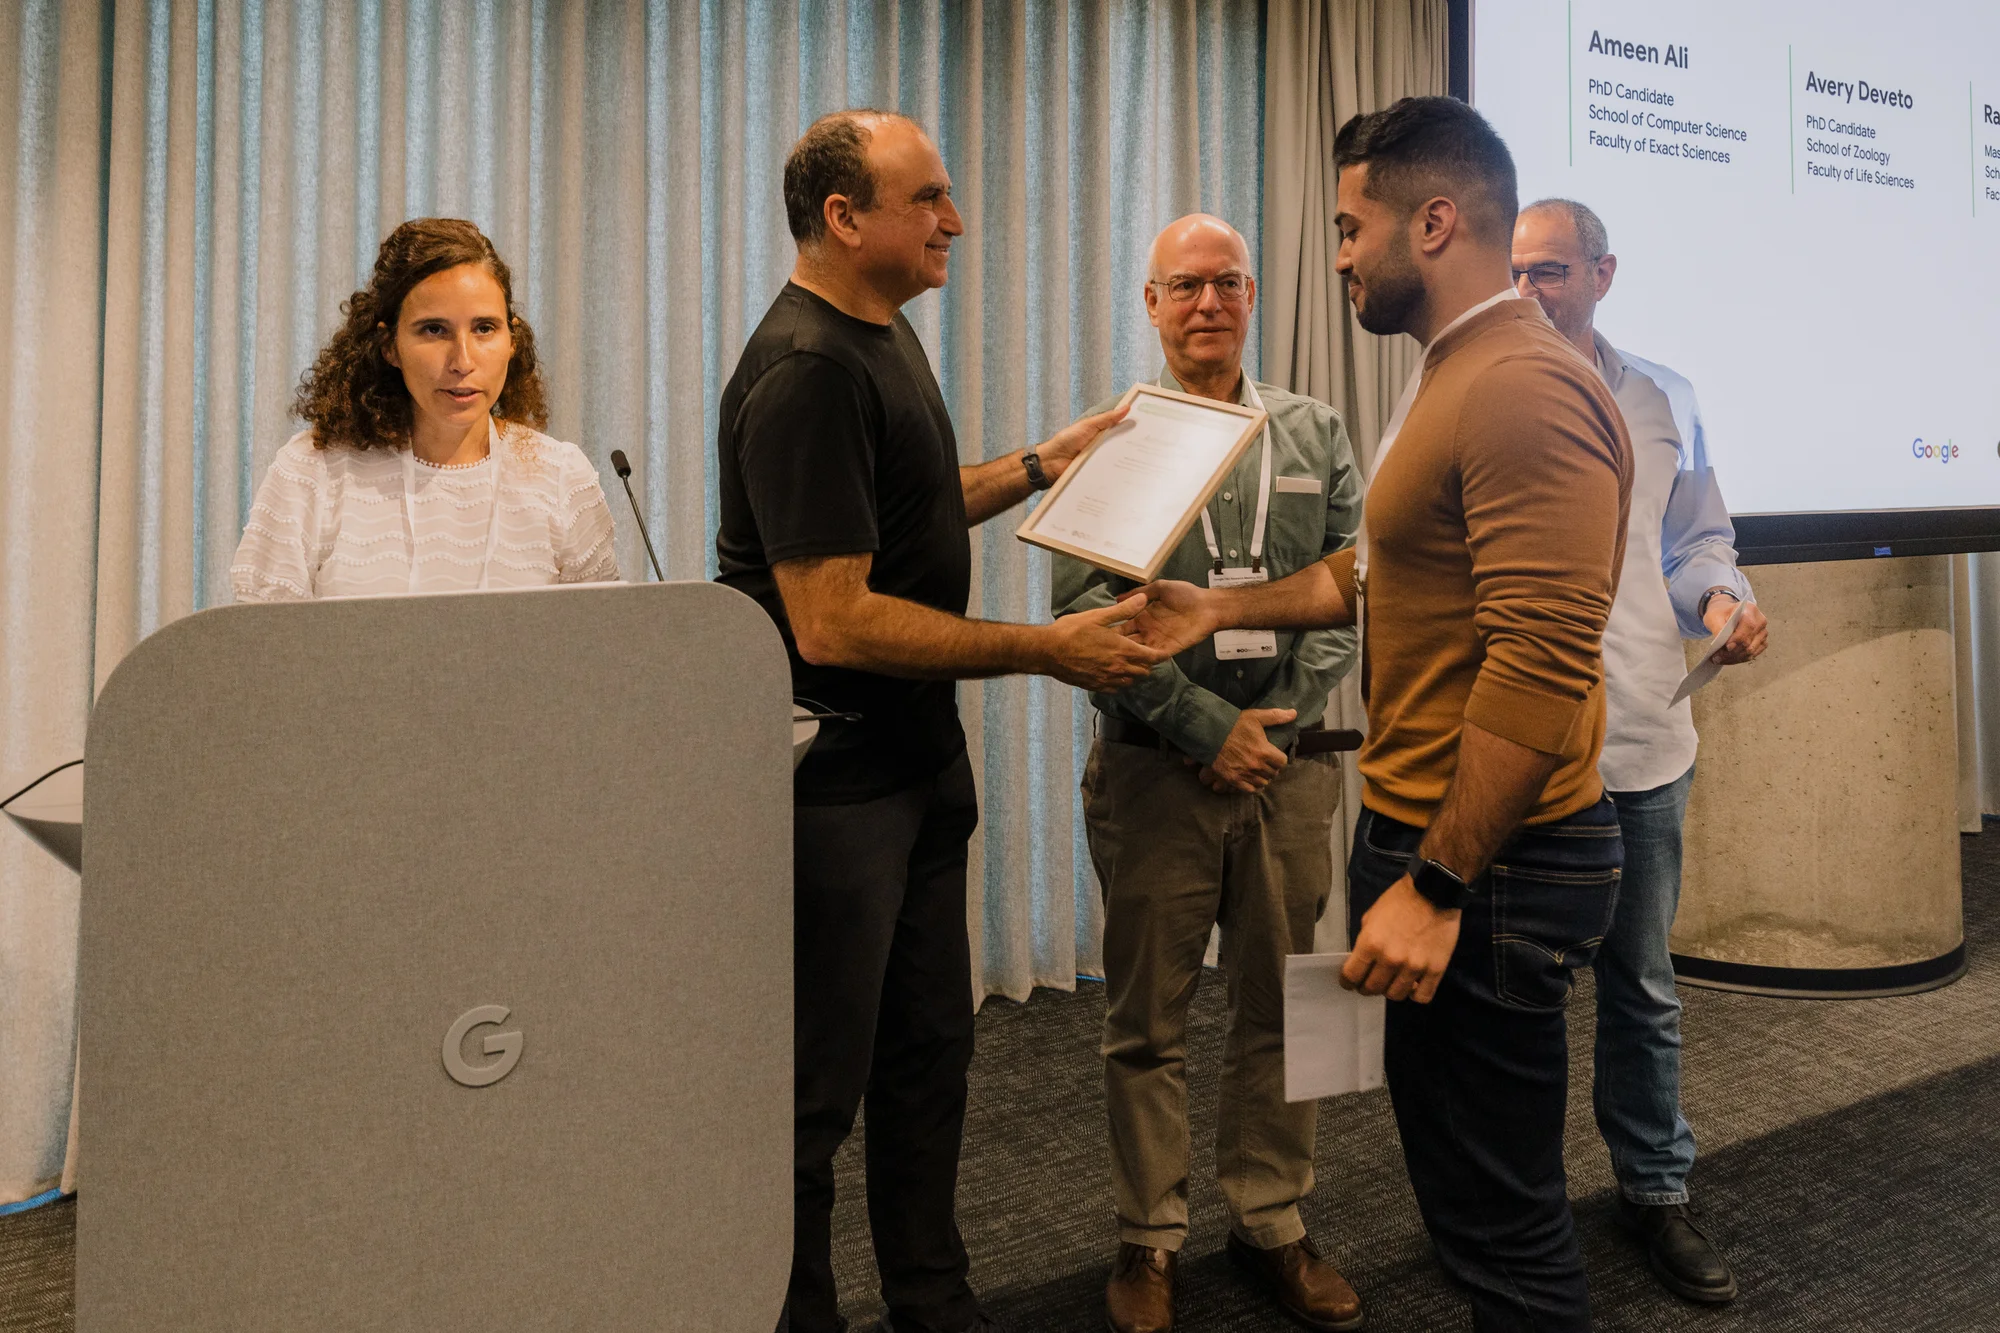 One person speaking behind a podium; one person handing a certificate to another person, while two people stand next to them smiling